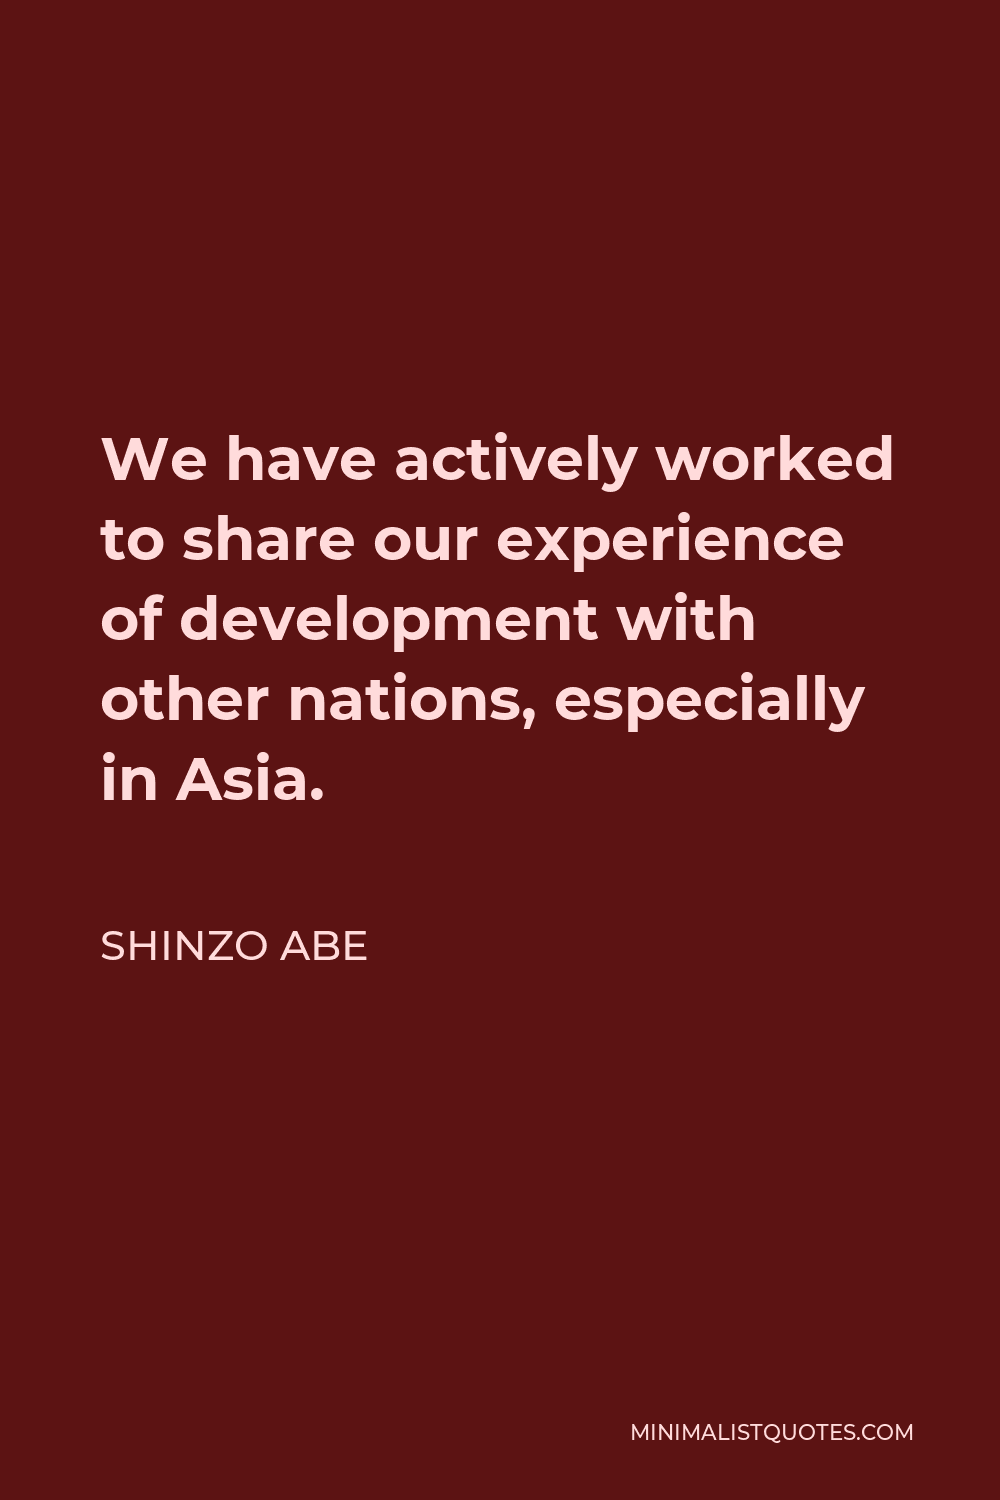 Shinzo Abe Quote - We have actively worked to share our experience of development with other nations, especially in Asia.